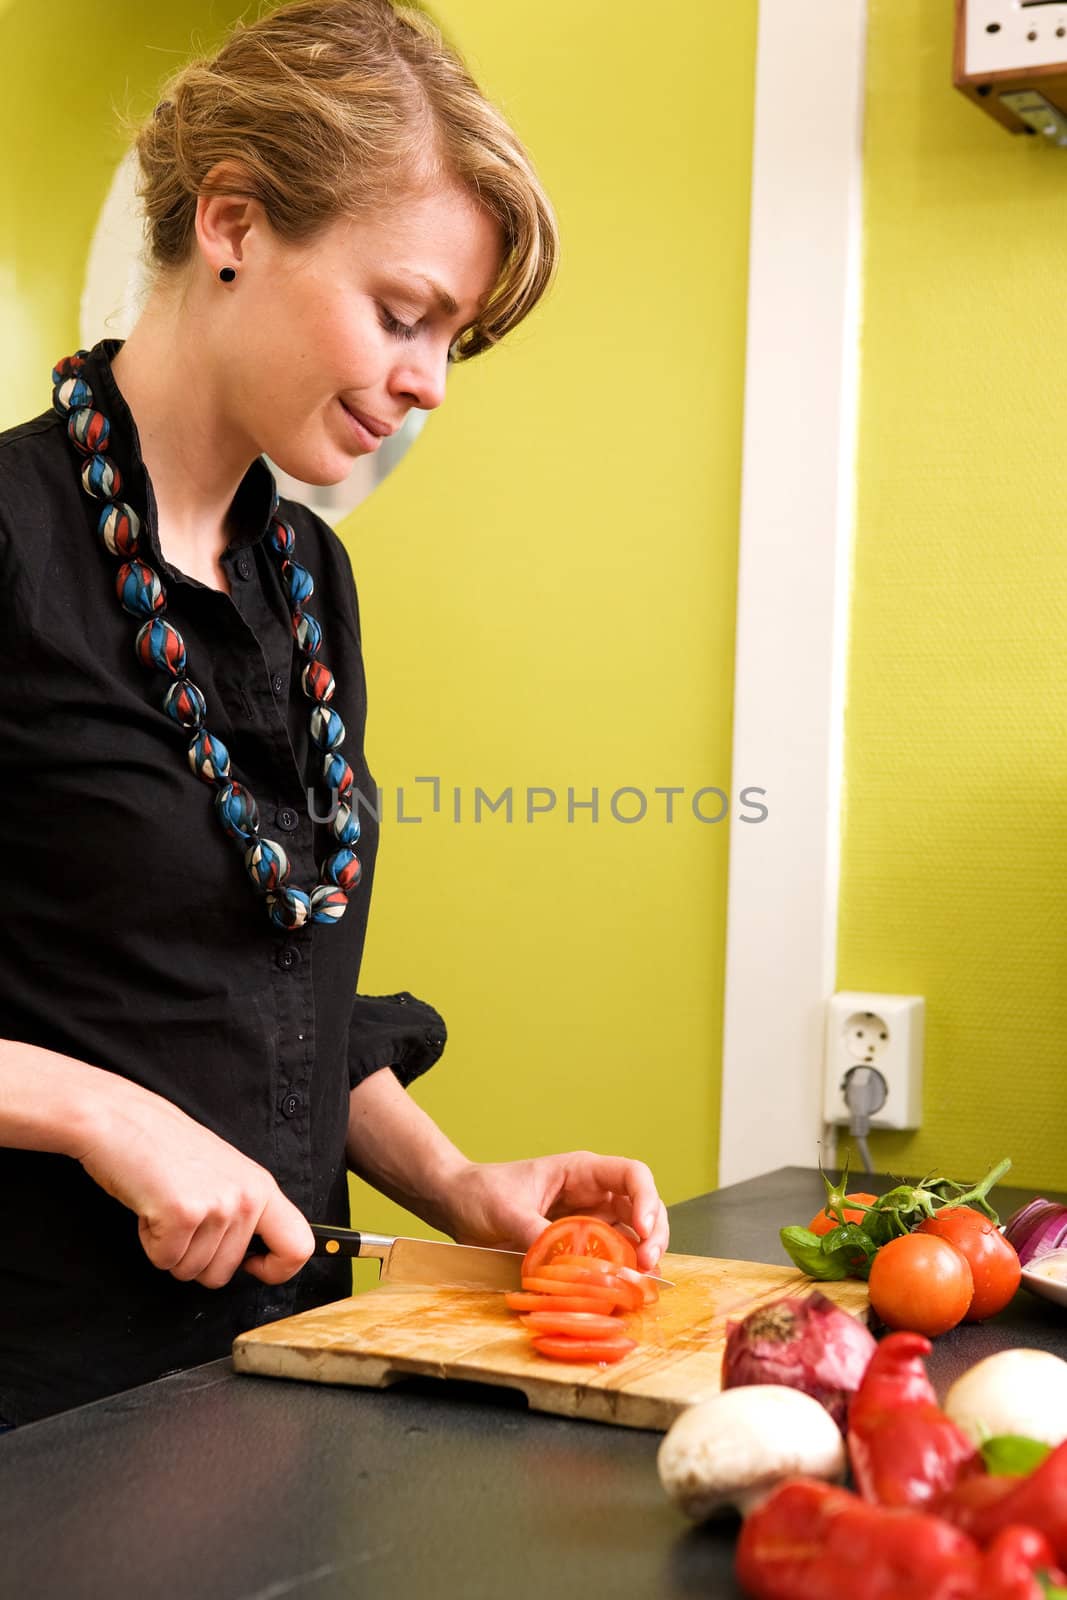 A female is at home in the kitchen slicing tomatoes for a pizza.